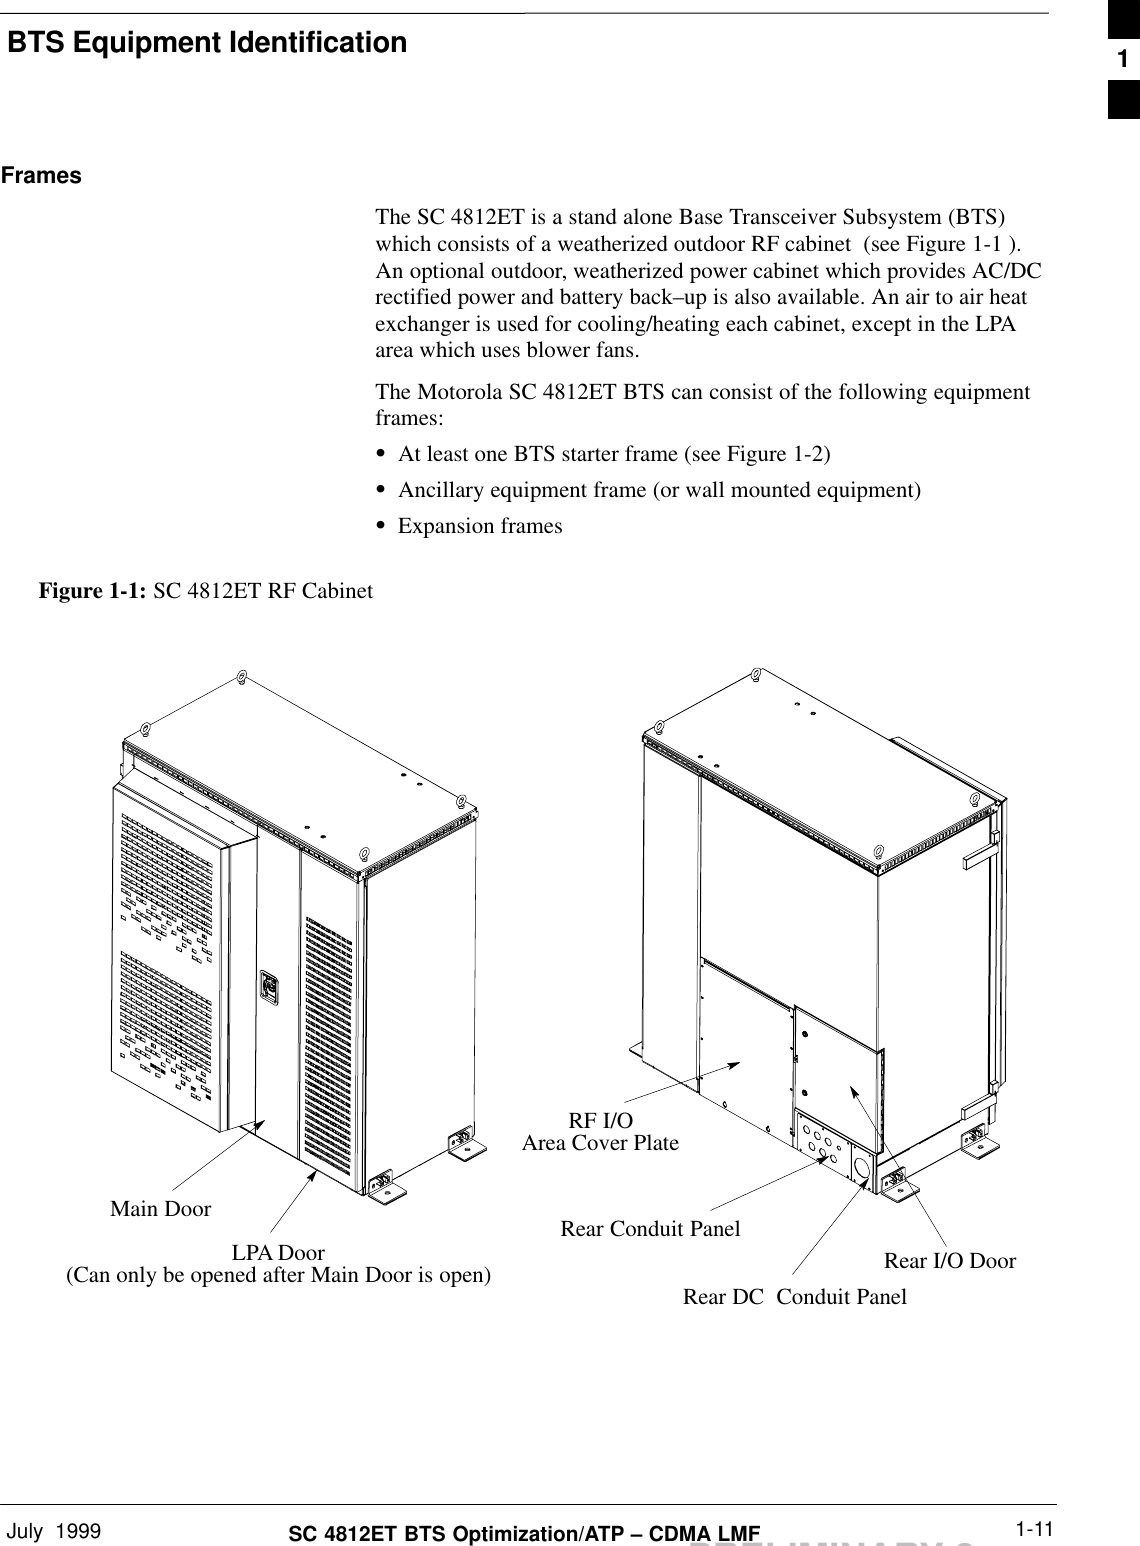 BTS Equipment IdentificationJuly  1999 1-11SC 4812ET BTS Optimization/ATP – CDMA LMFPRELIMINARY 2FramesThe SC 4812ET is a stand alone Base Transceiver Subsystem (BTS)which consists of a weatherized outdoor RF cabinet  (see Figure 1-1 ).An optional outdoor, weatherized power cabinet which provides AC/DCrectified power and battery back–up is also available. An air to air heatexchanger is used for cooling/heating each cabinet, except in the LPAarea which uses blower fans.The Motorola SC 4812ET BTS can consist of the following equipmentframes:SAt least one BTS starter frame (see Figure 1-2)SAncillary equipment frame (or wall mounted equipment)SExpansion framesFigure 1-1: SC 4812ET RF CabinetMain DoorLPA Door(Can only be opened after Main Door is open)RF I/OArea Cover PlateRear I/O DoorRear DC  Conduit PanelRear Conduit Panel1